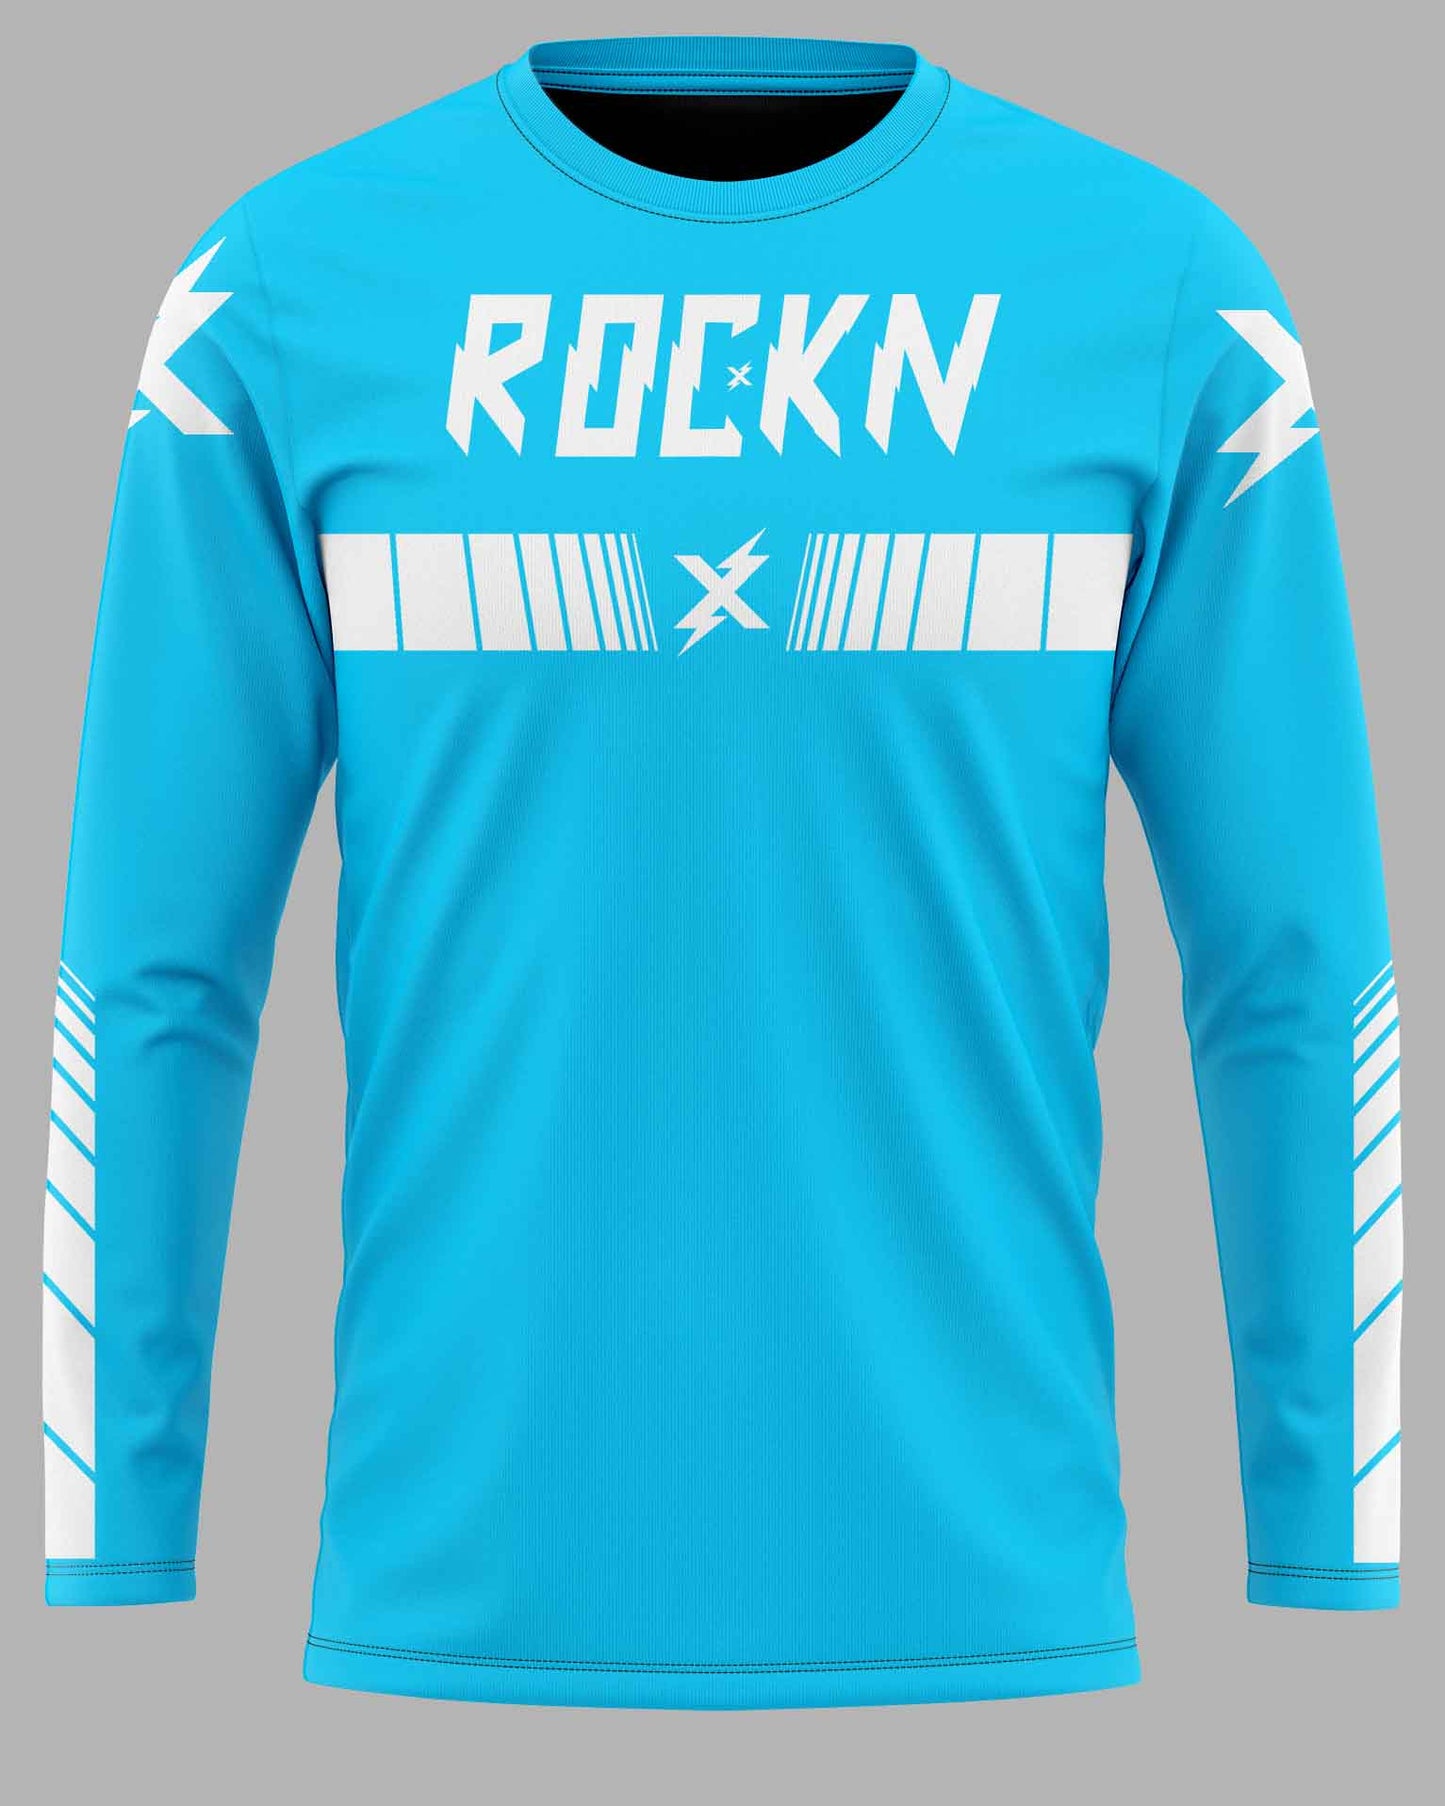 Jersey Speed Lines Cyan - FREE Custom Sublimation